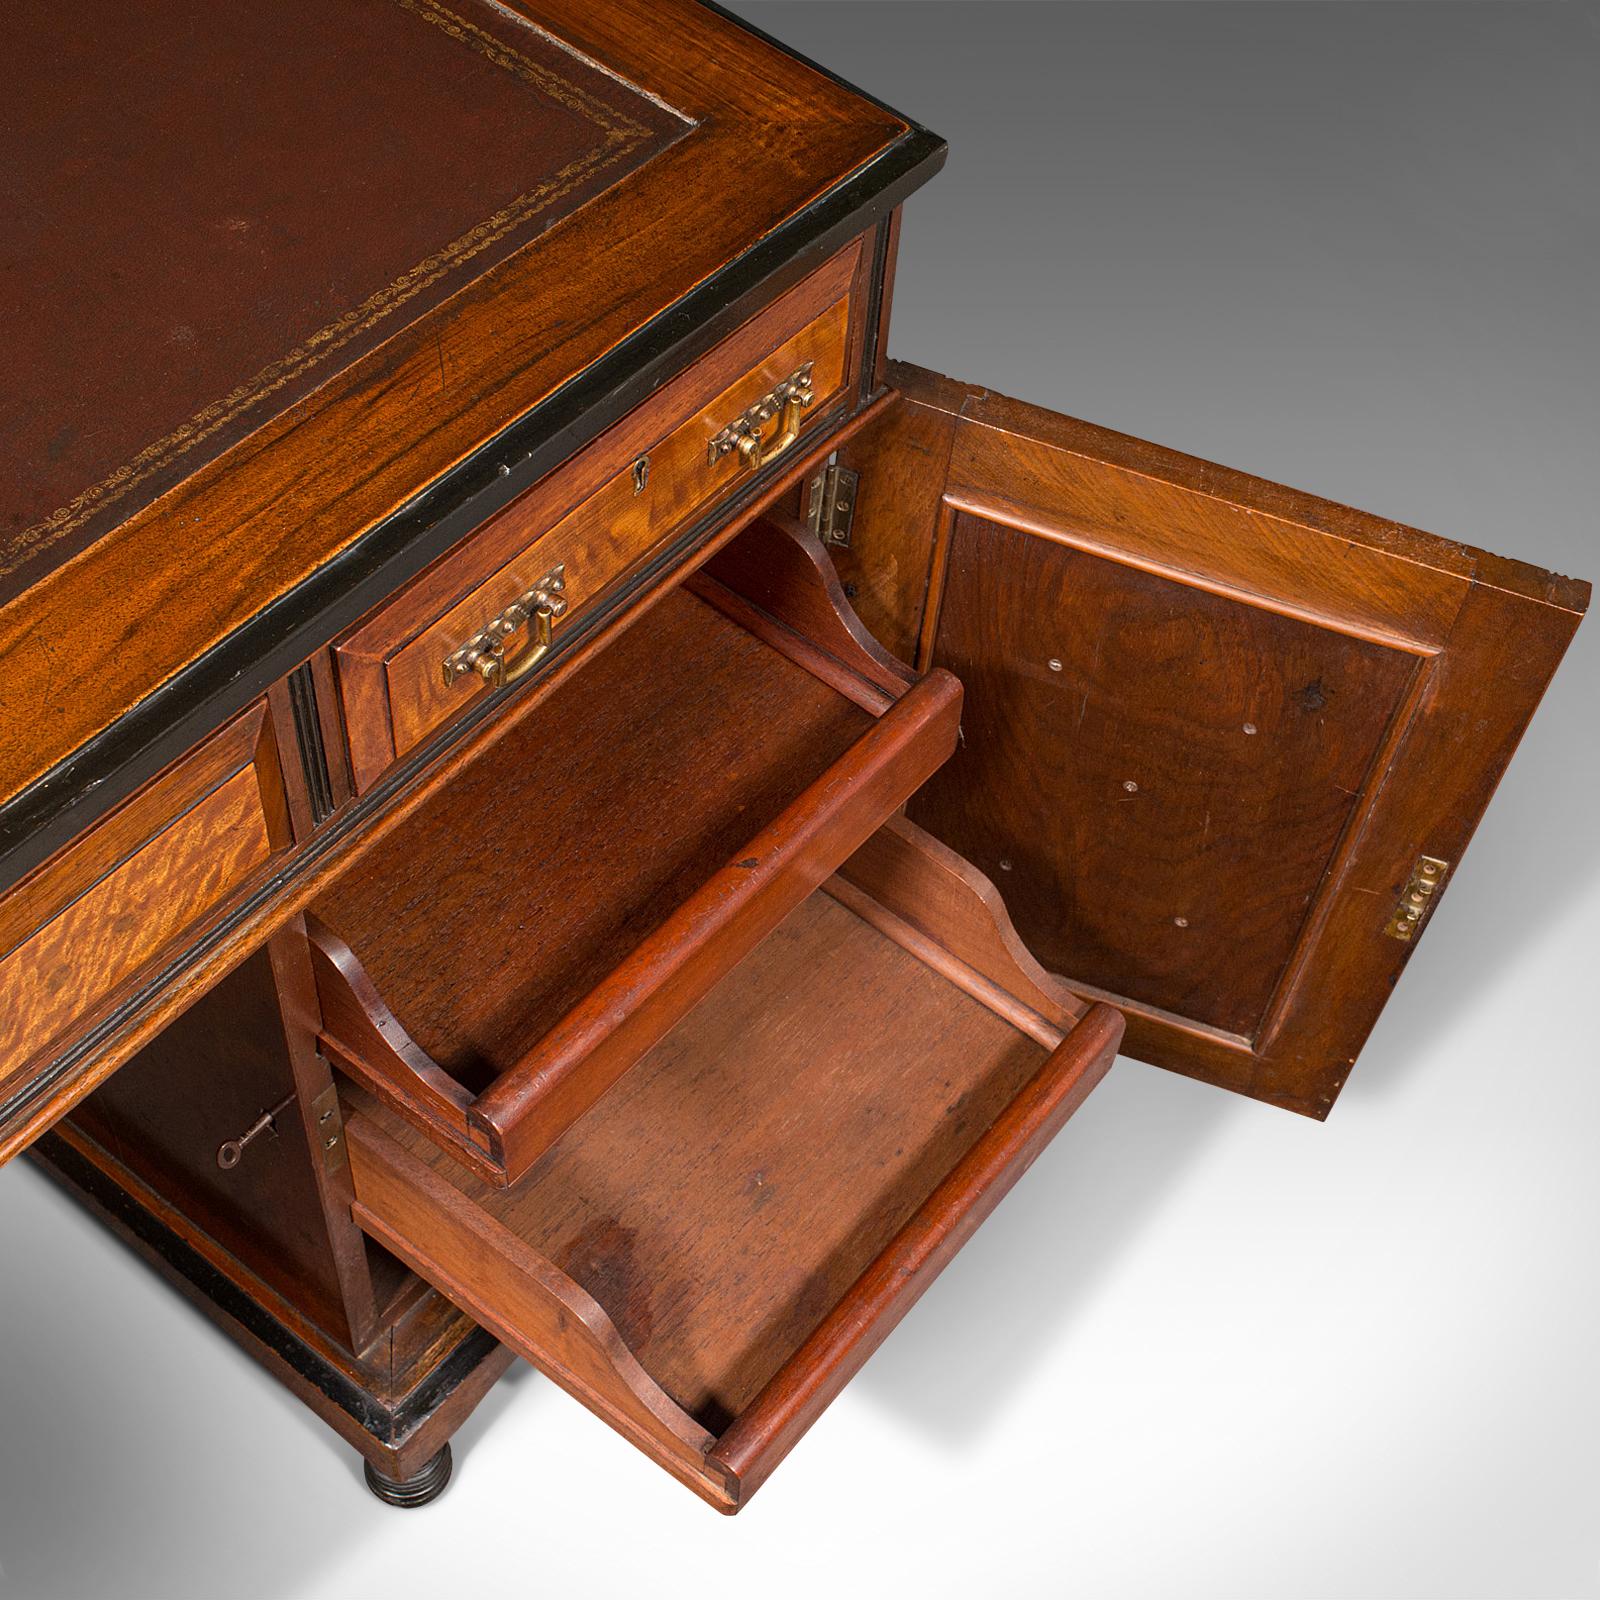 Antique Ladies Morning Room Desk, English, Writing Table, Aesthetic Period, 1880 For Sale 2